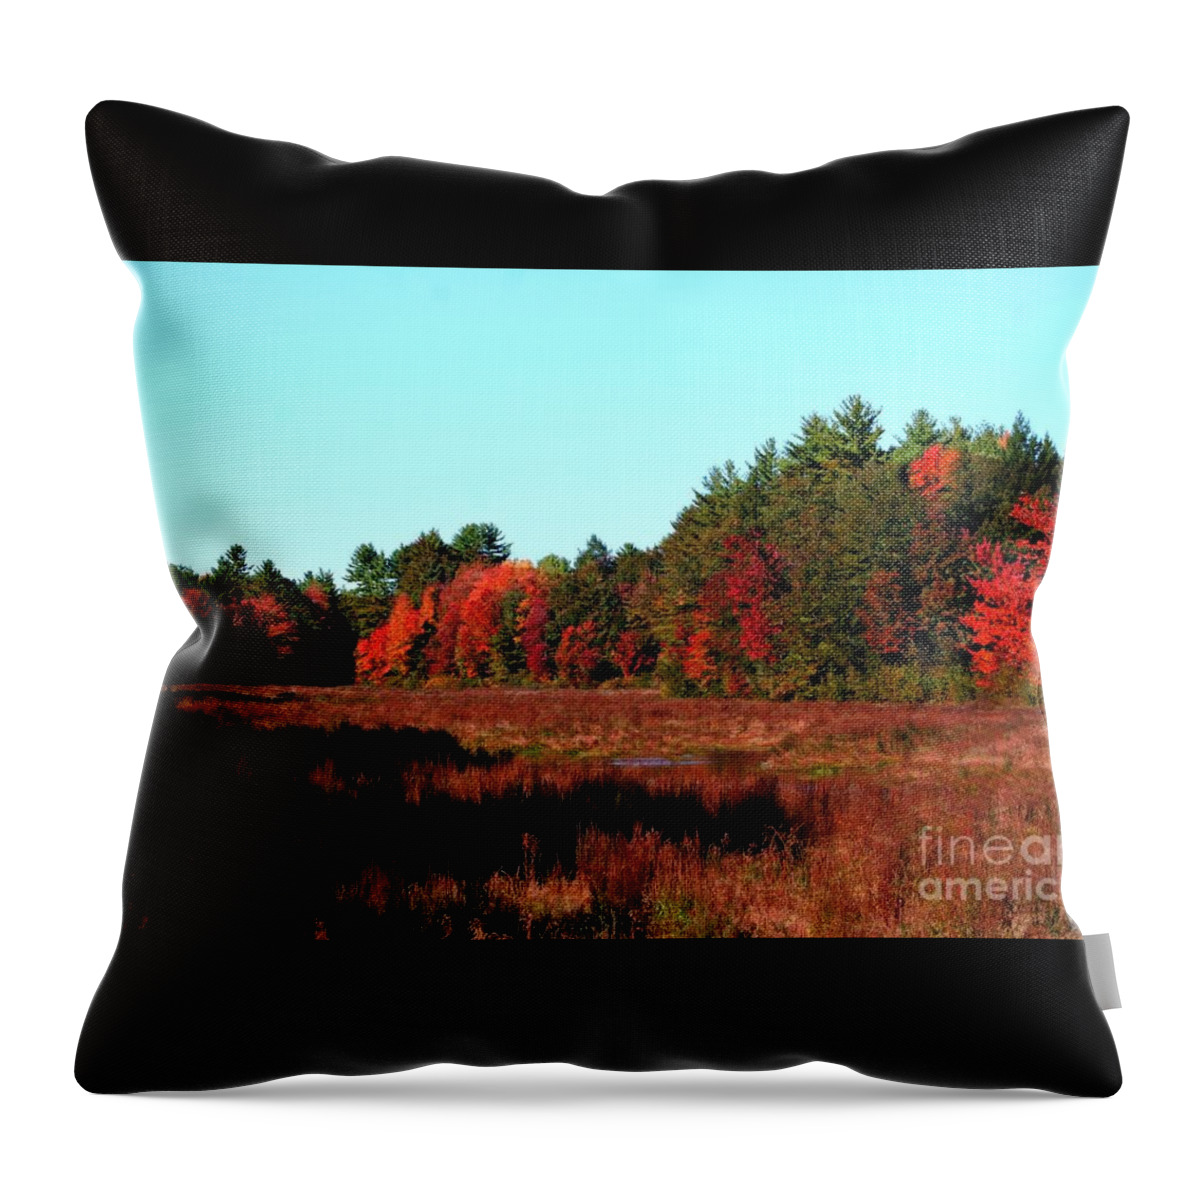 Autumn Throw Pillow featuring the photograph Autumn In Fremont NH by Barbara S Nickerson